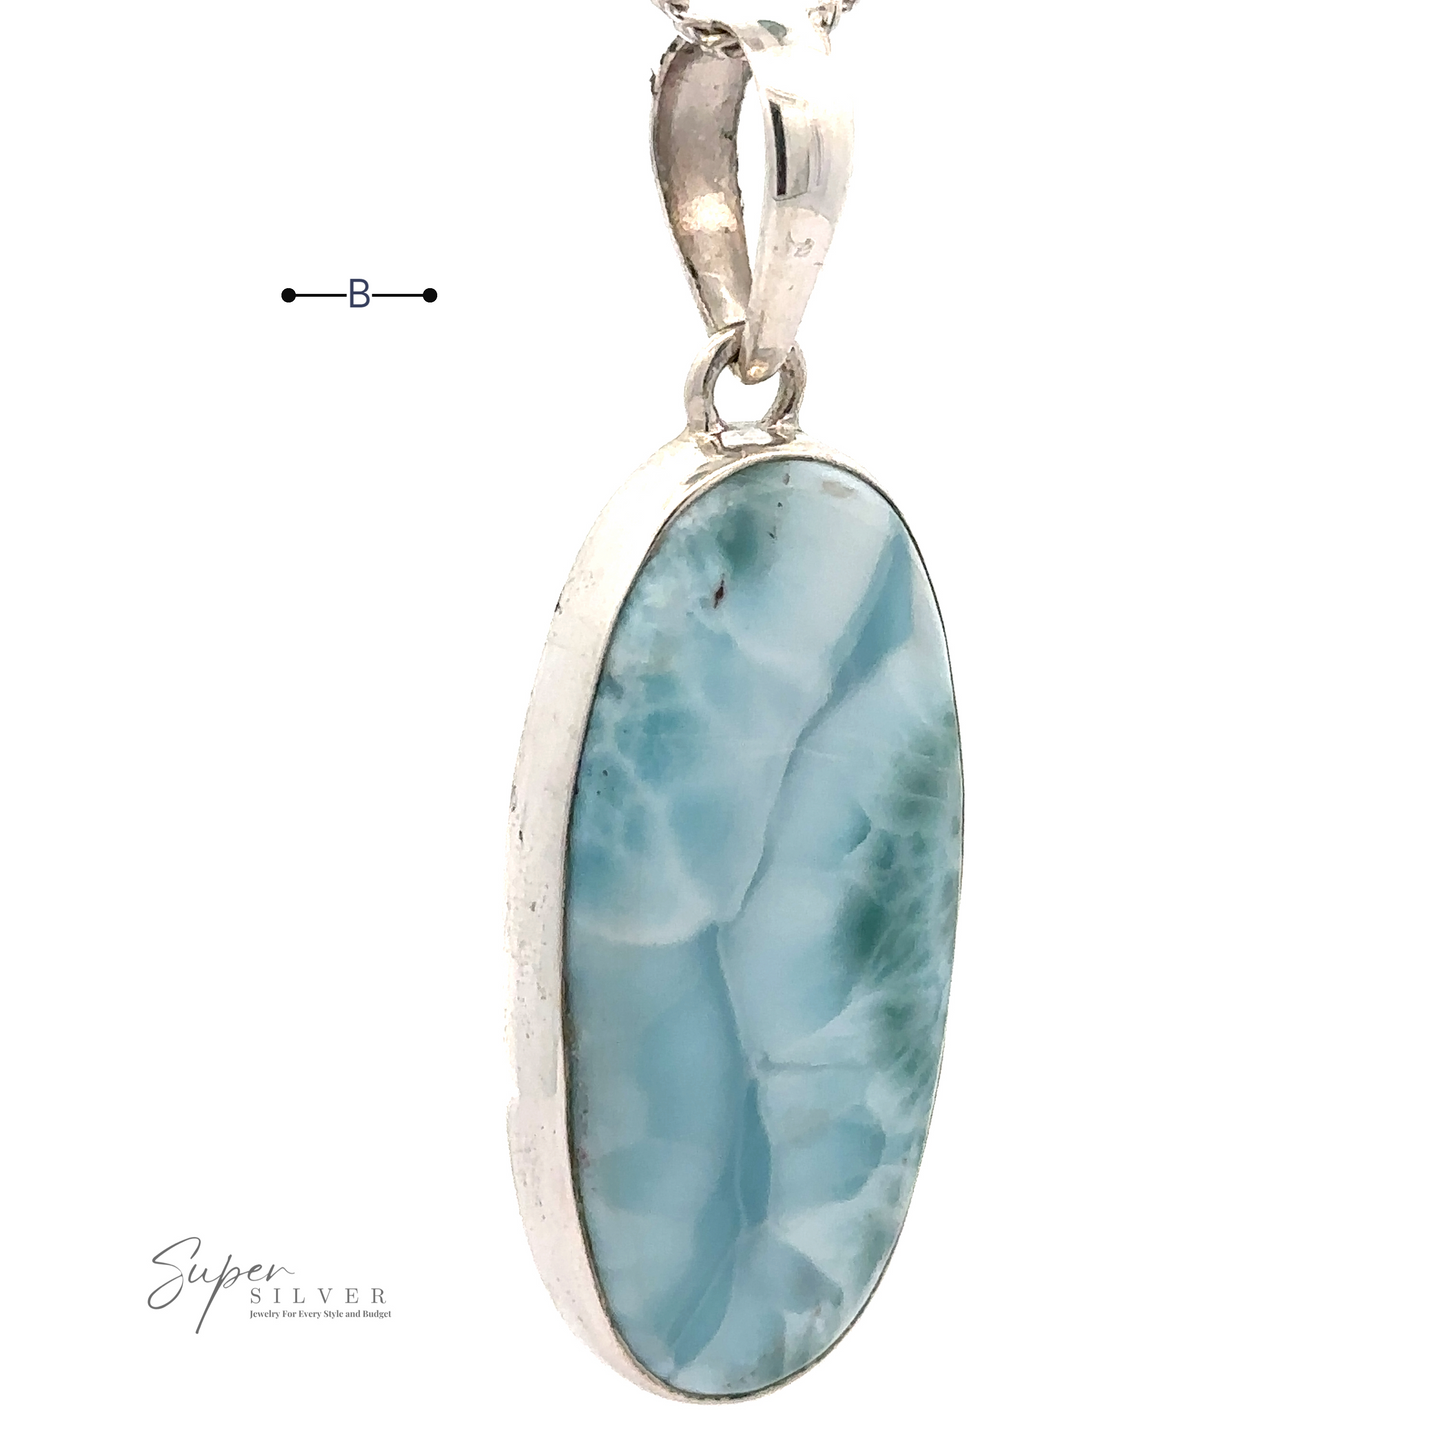 
                  
                    A Beautiful Long Oval Larimar Pendant featuring an oval-shaped, blue-green Larimar gemstone from the Dominican Republic, showcasing a marbled pattern. The chain's .925 Sterling Silver clasp is visible at the top.
                  
                